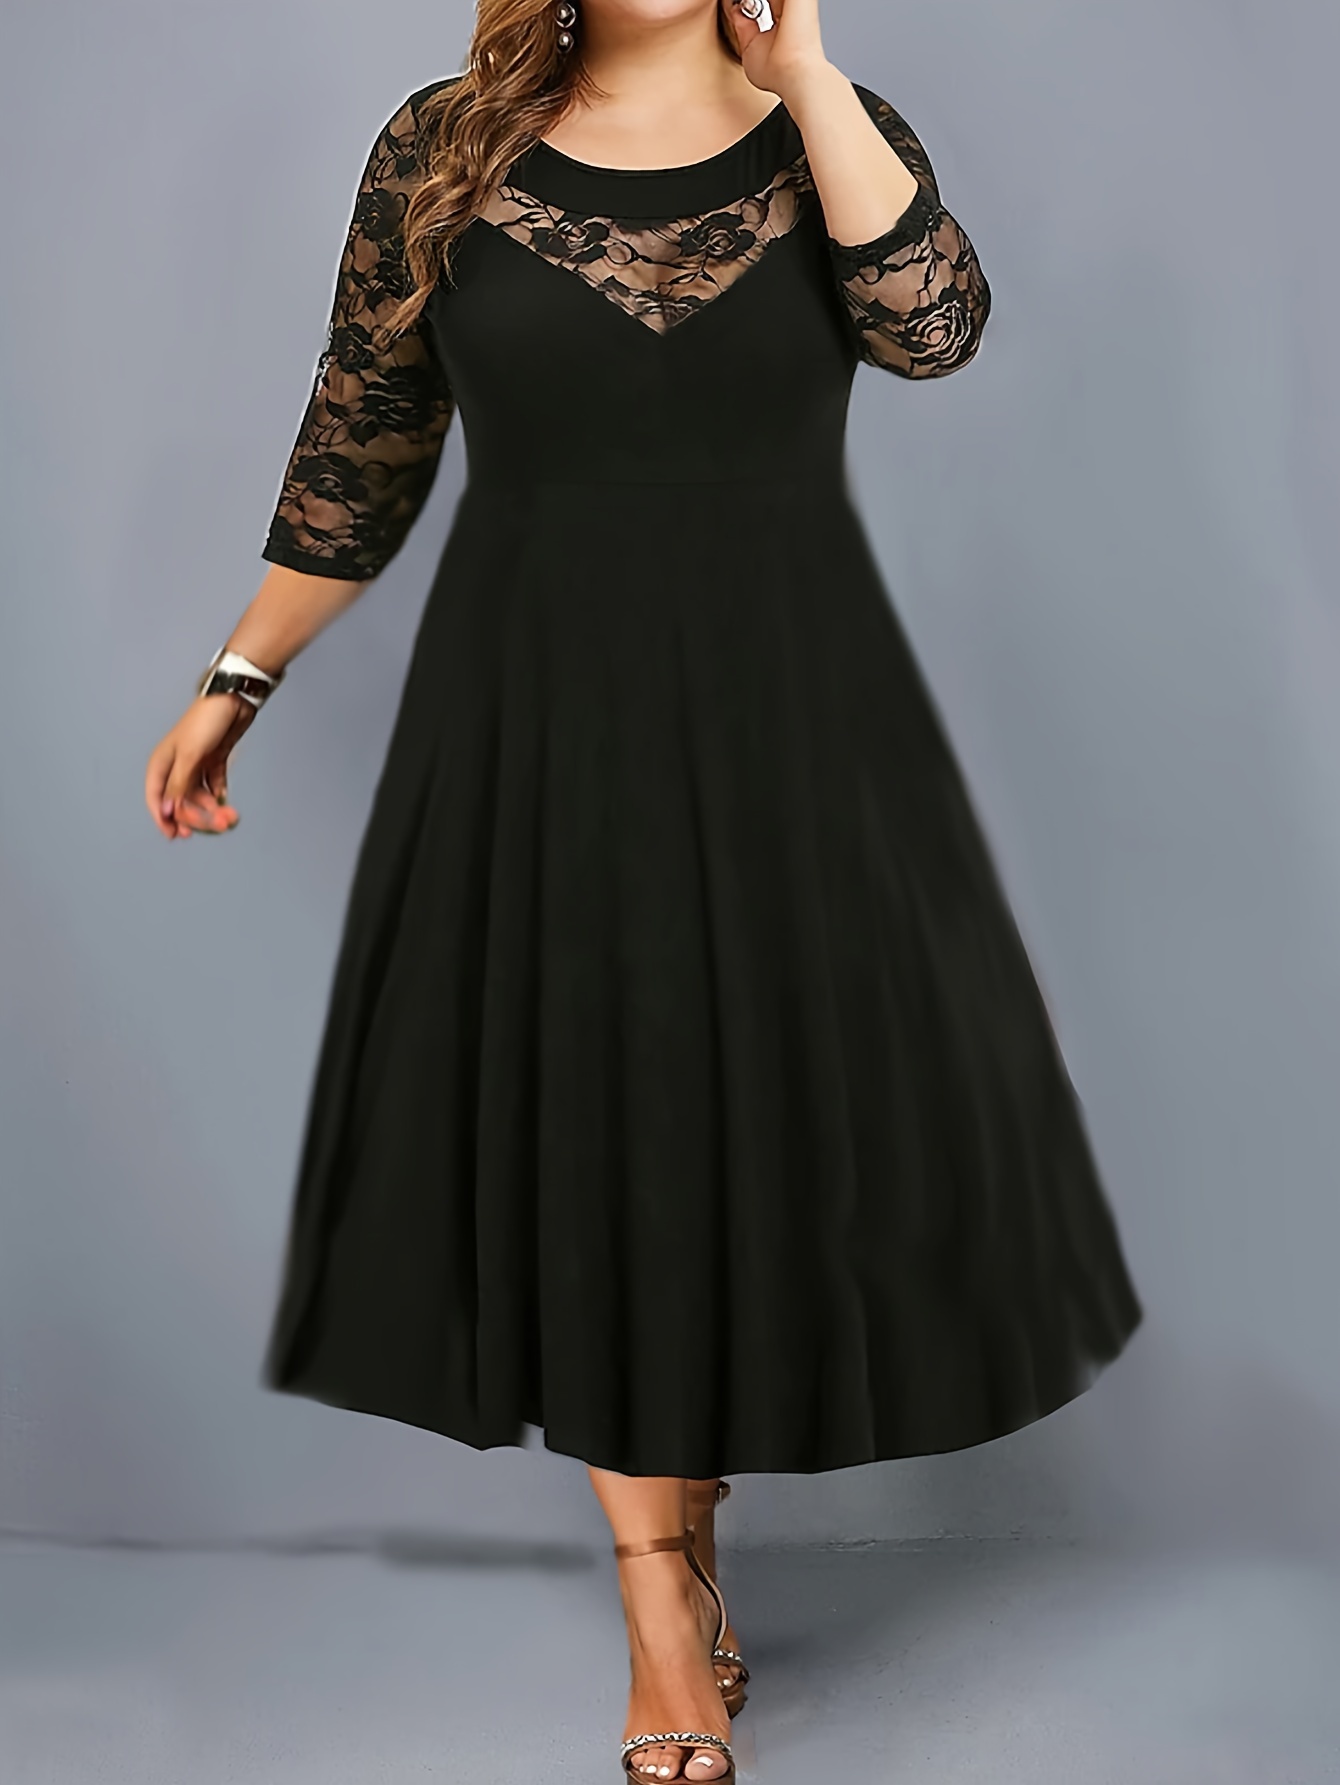 Plus Size Casual Dress, Women's Plus Solid Contrast Guipure Lace Trim Cap  Sleeve Stand Collar A-line Smock Dress